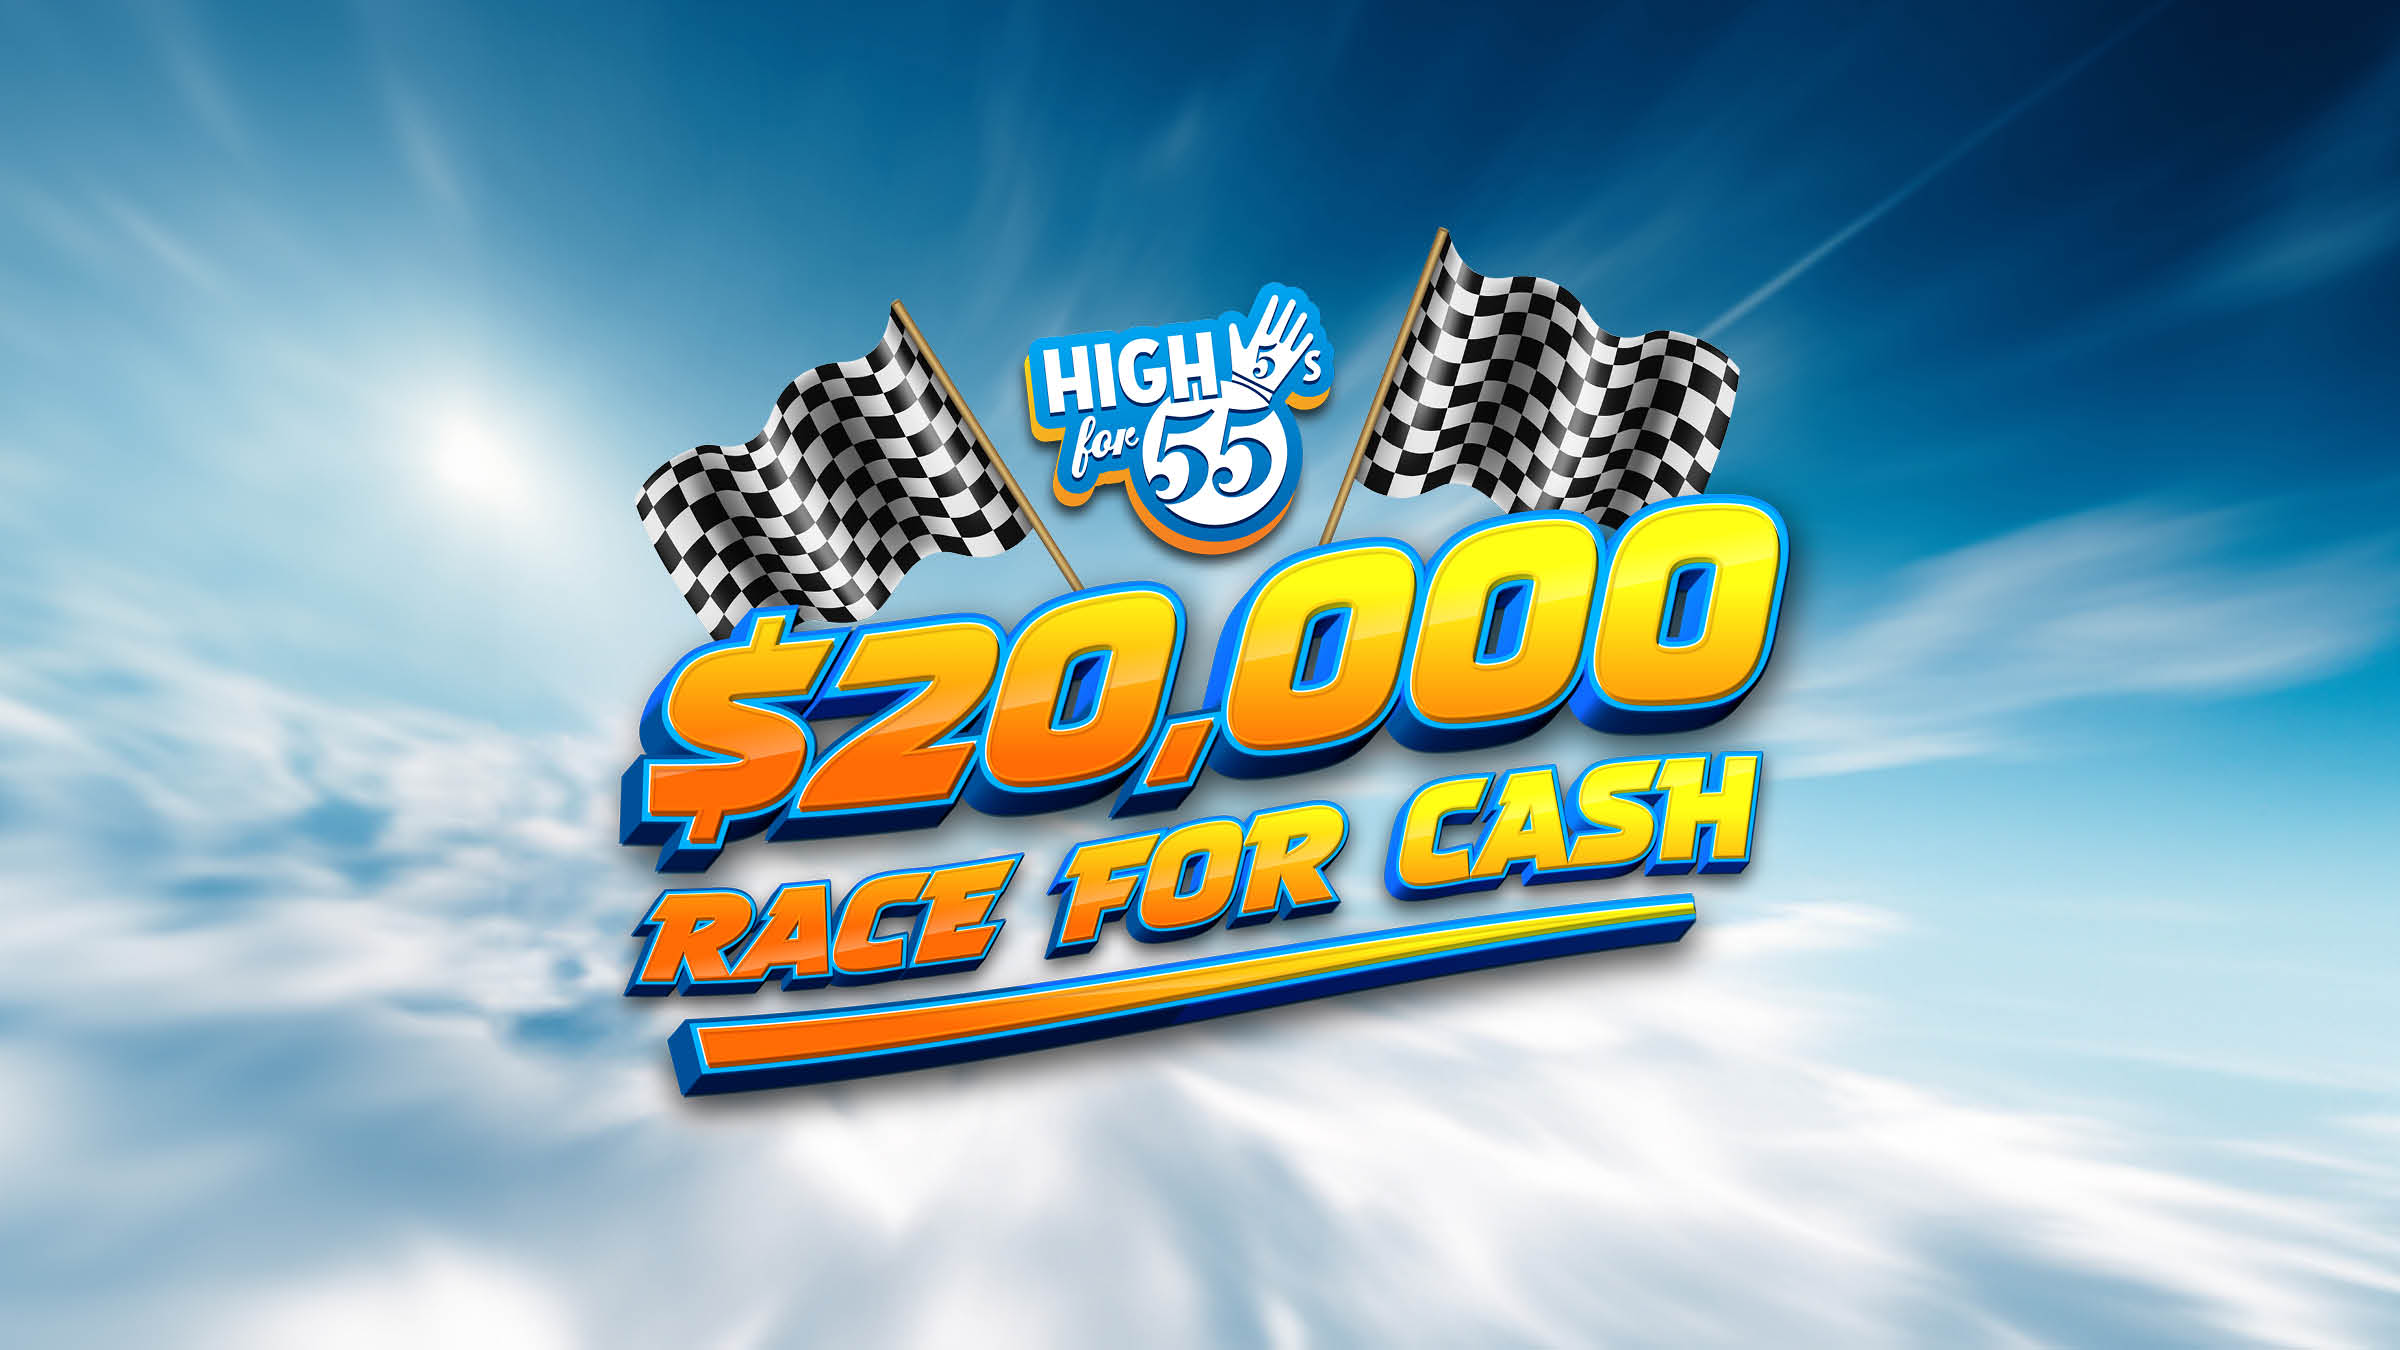 High 5s for 55’s – $20,000 RACE FOR CASH